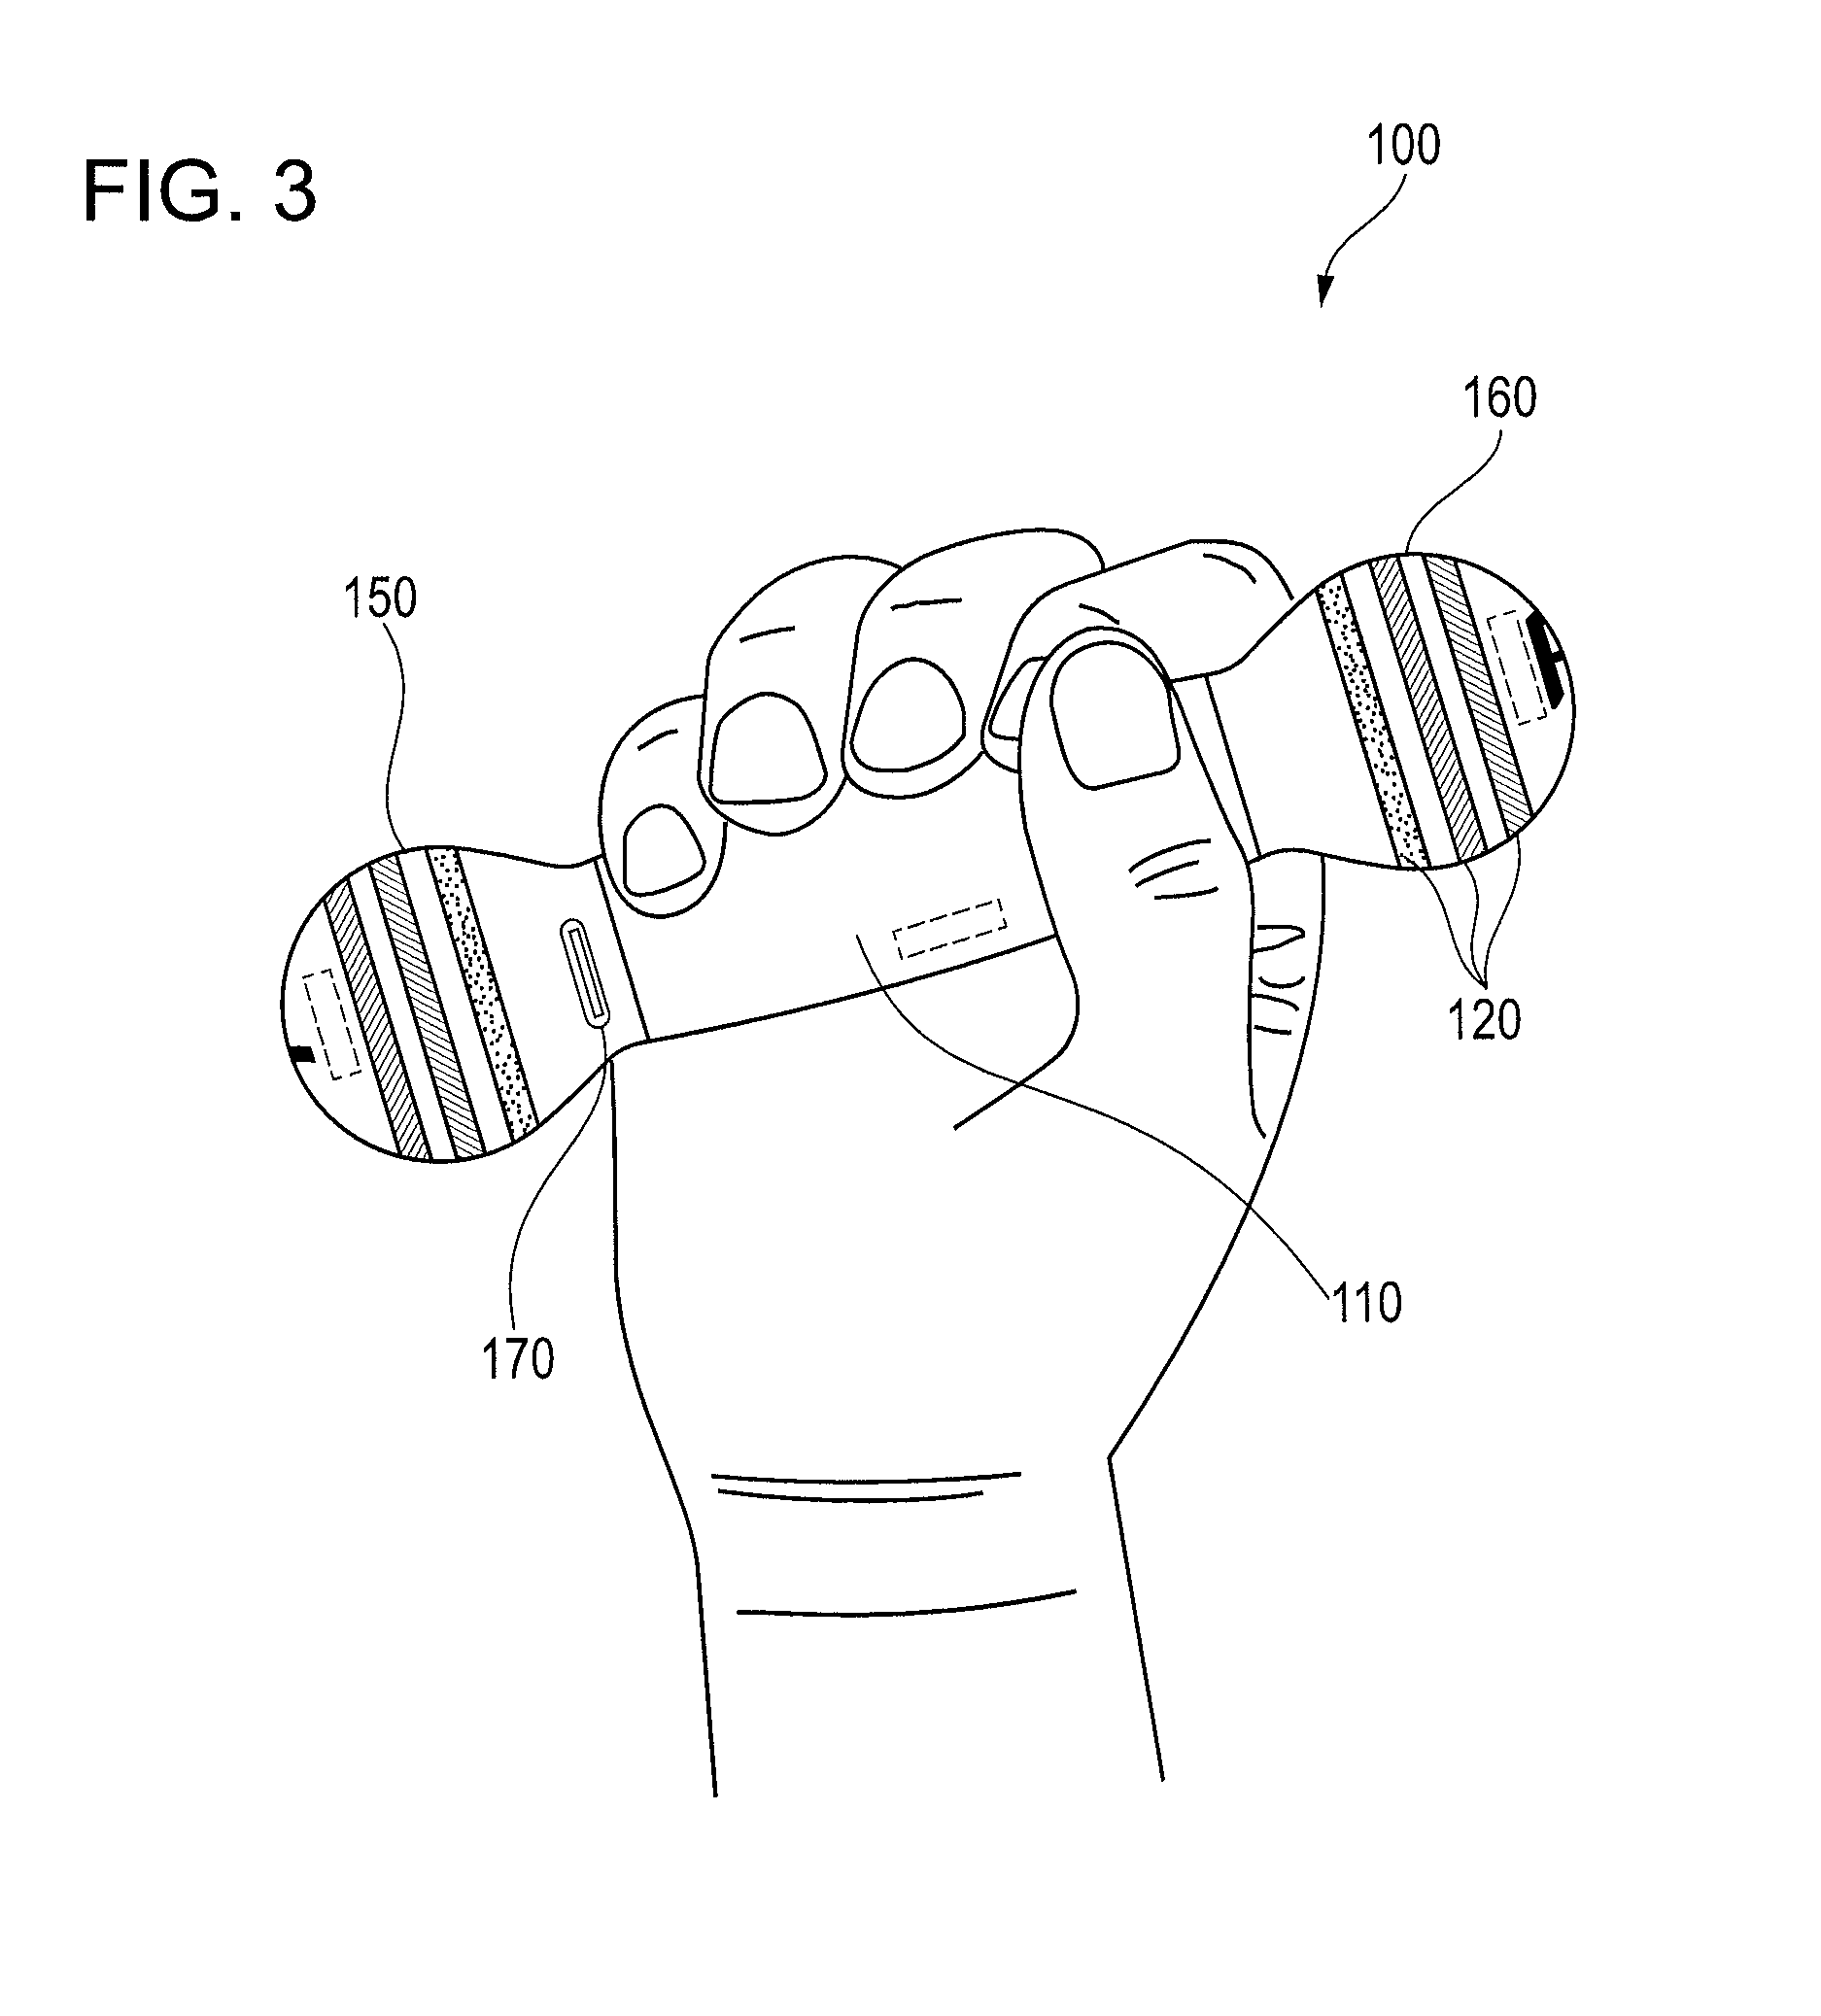 Digital instrument for use in physical therapy and method for administering physical therapy using same